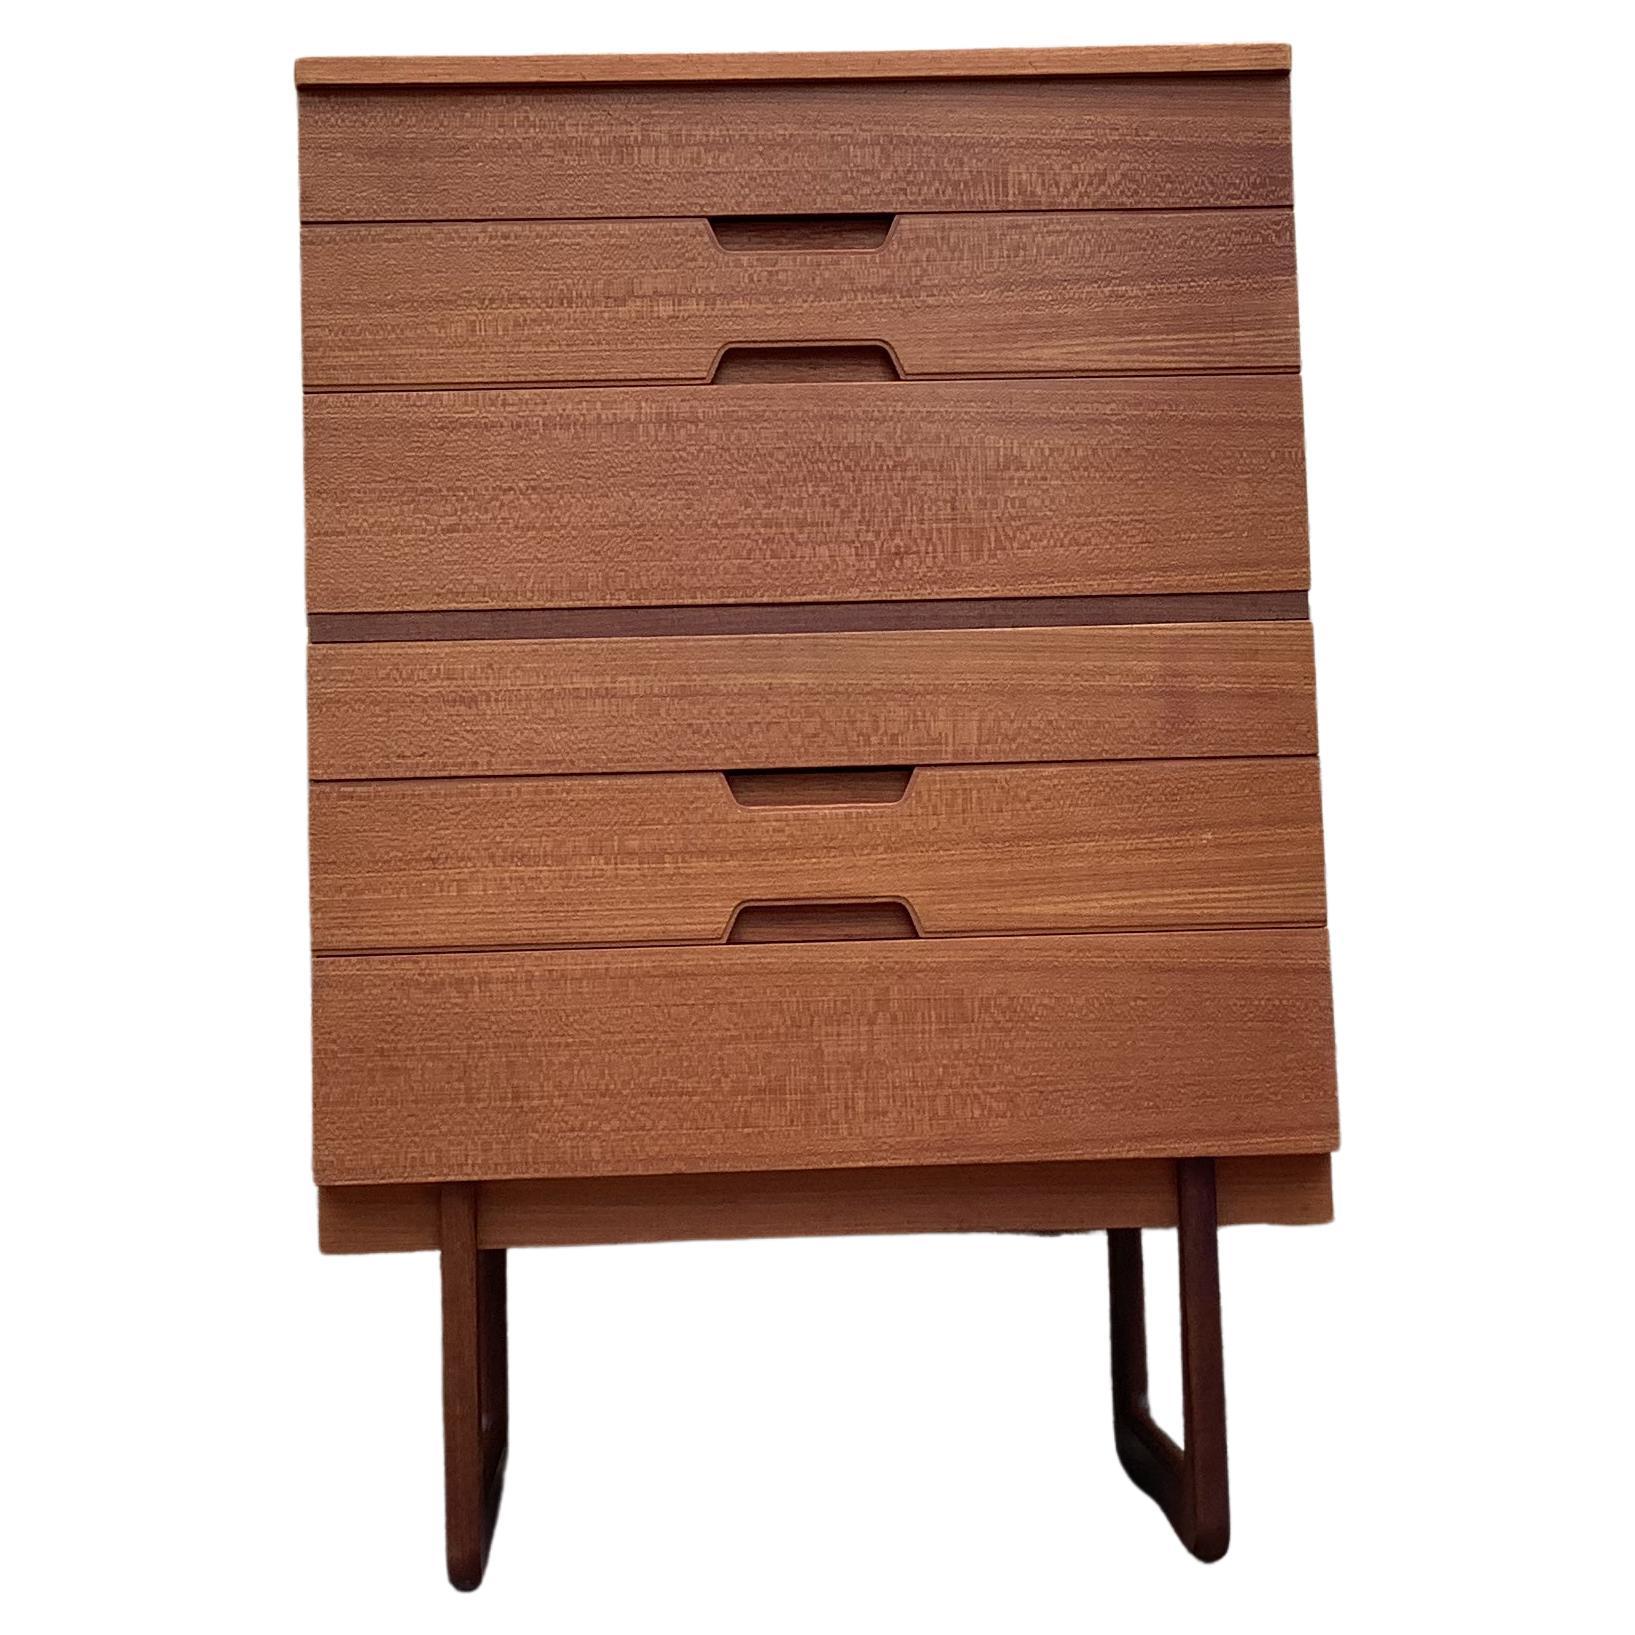 Uniflex Q Range Chest of Draws by Gunther Hoffstead/1960’s Chest of Draws For Sale